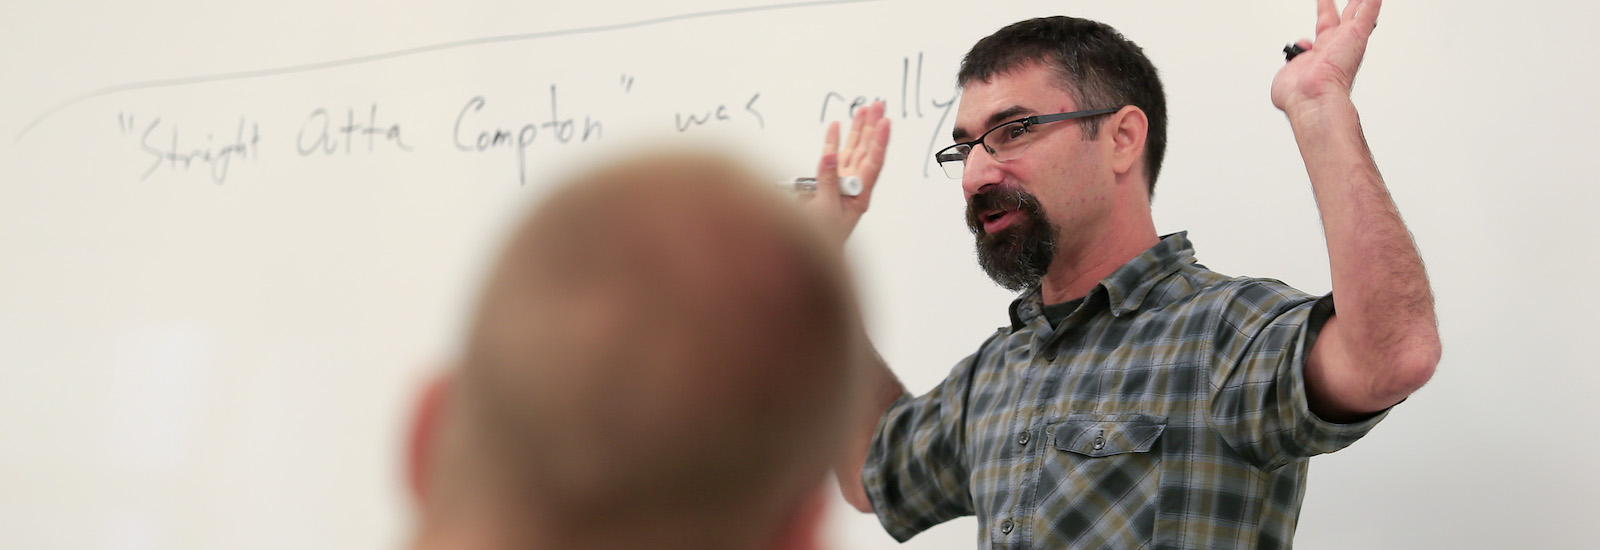 CMU Professor Matt Katz gives a lecture during one of his classes